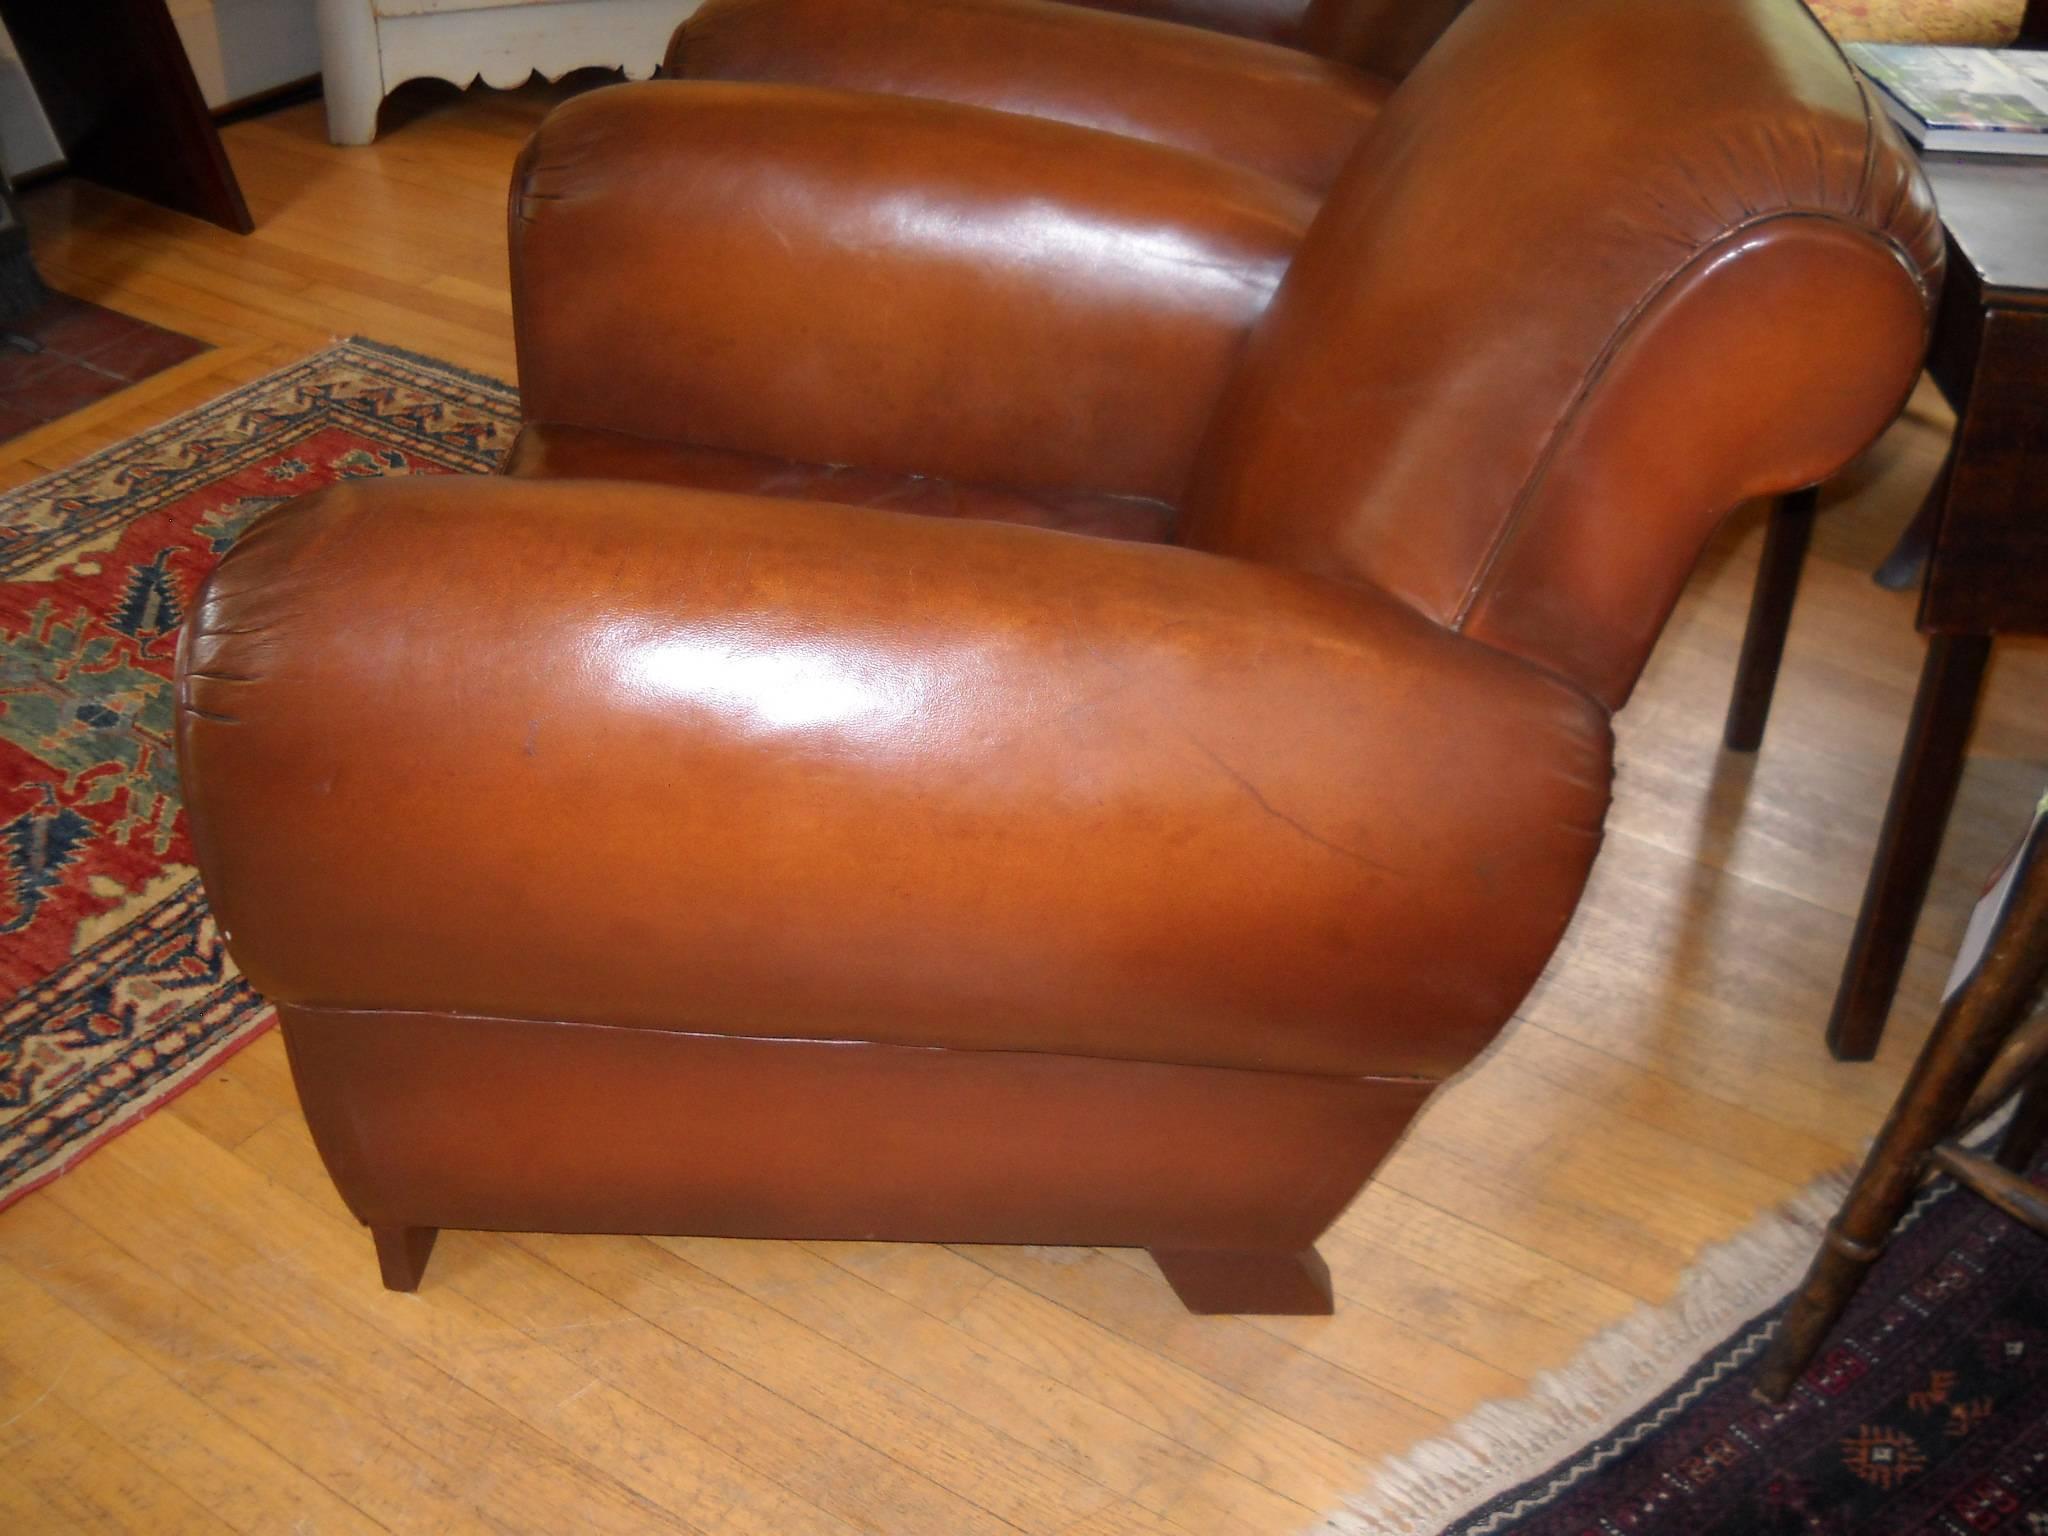 You can’t find leather chairs from France that are in better condition with a warmer color or are more comfortable. They are simply a rich pair of 1930 French leather chairs. No tears, rips or discolor throughout the chairs.